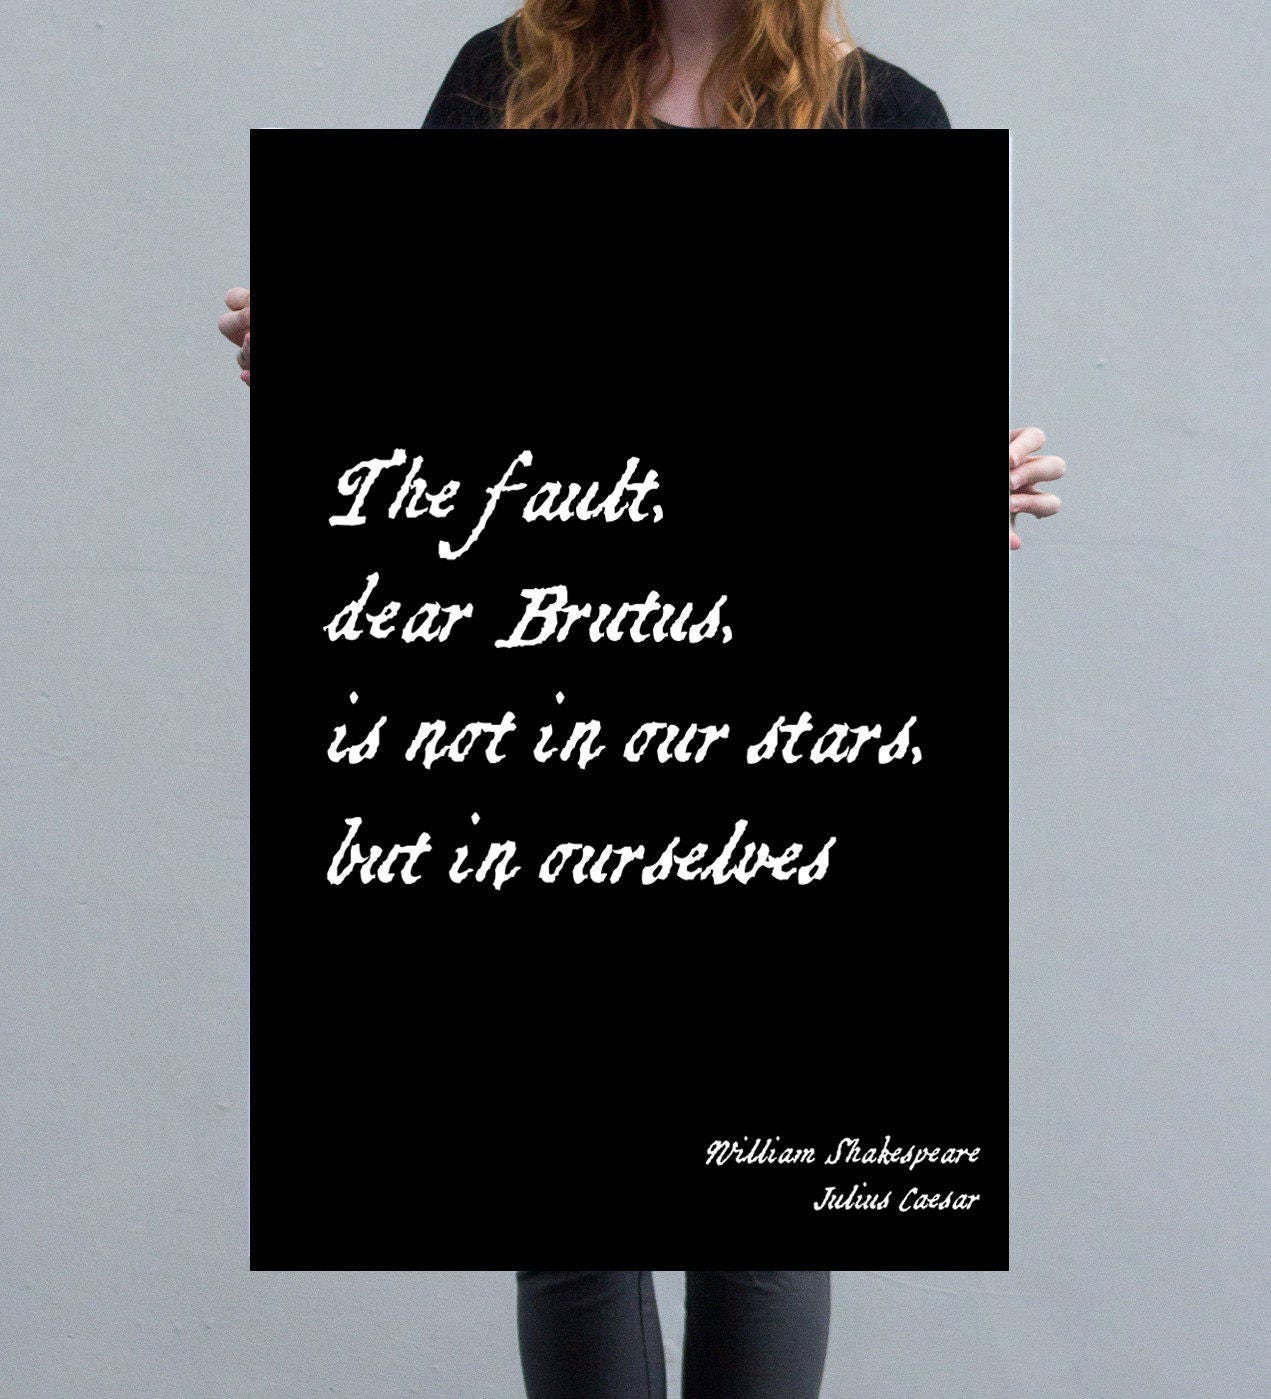 Julius Caesar Shakespeare Quote, The Fault Is Not In Our Stars